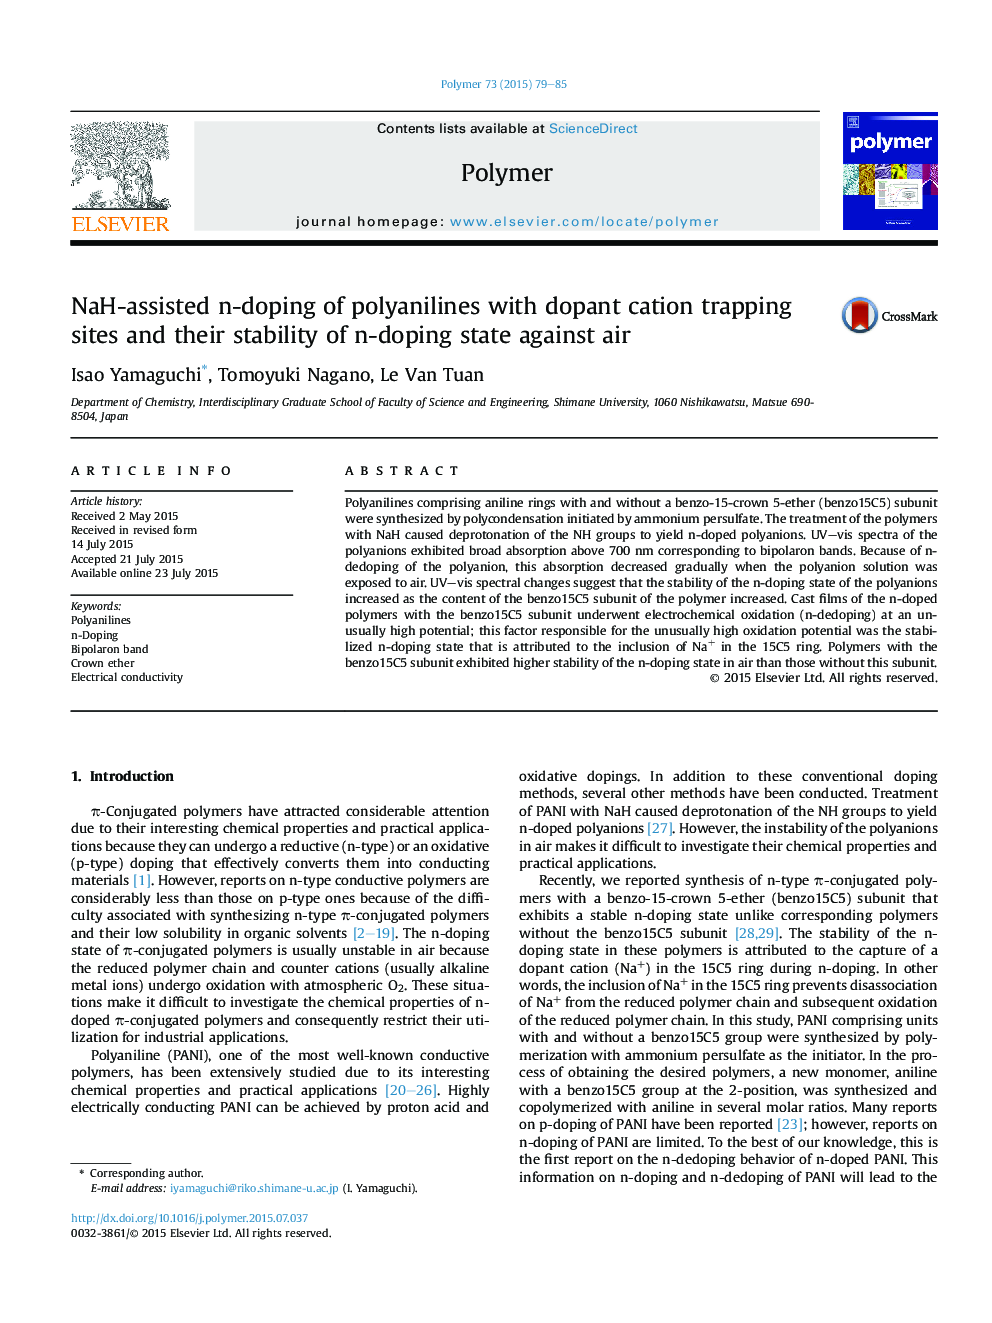 NaH-assisted n-doping of polyanilines with dopant cation trapping sites and their stability of n-doping state against air